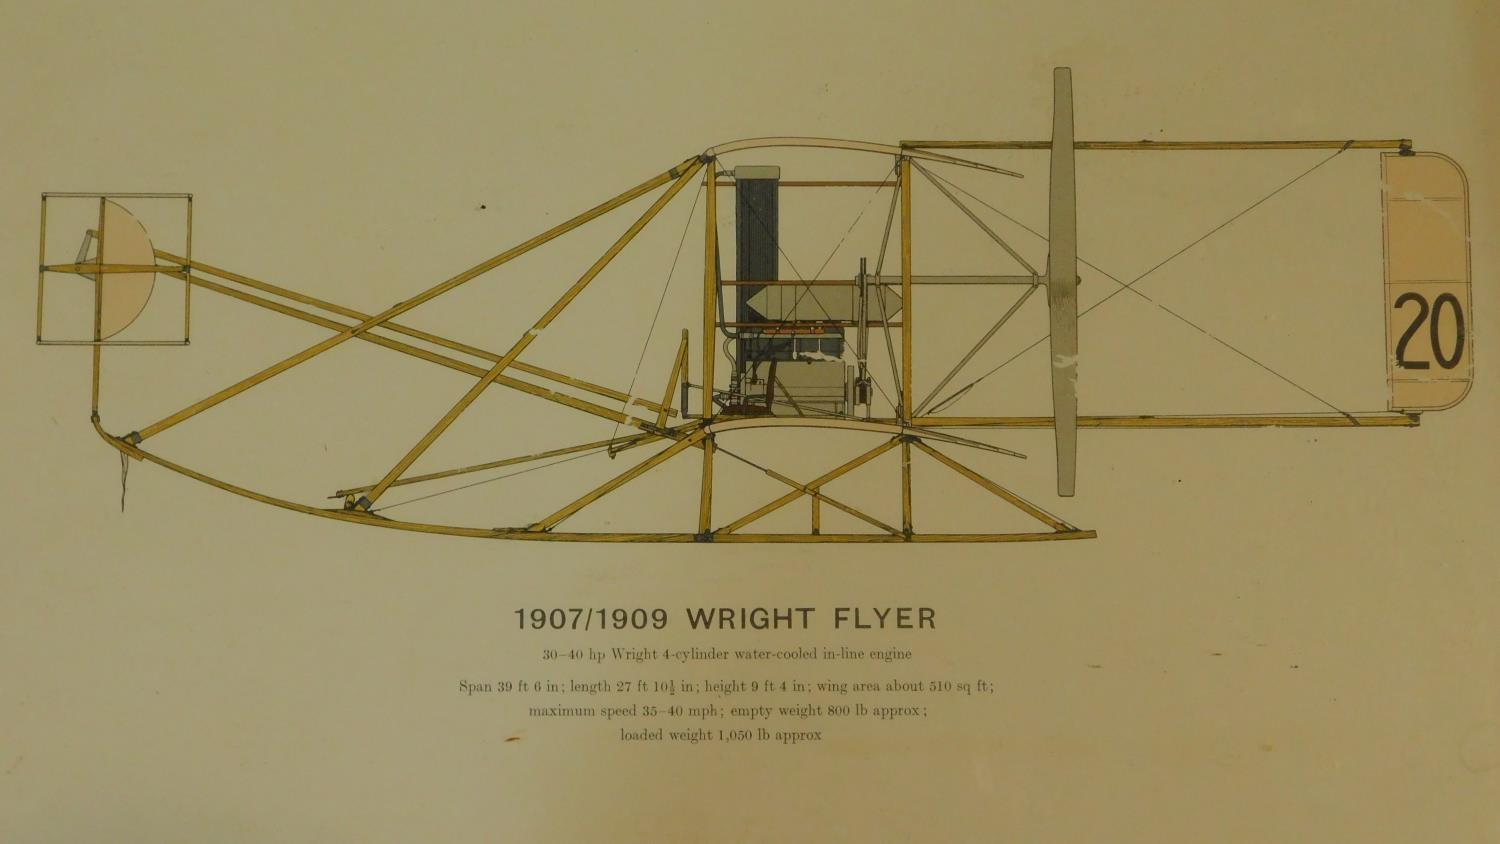 Three framed and glazed prints, boats by a port city, two ladies and 'Wright Flyer' schematics. - Image 5 of 6